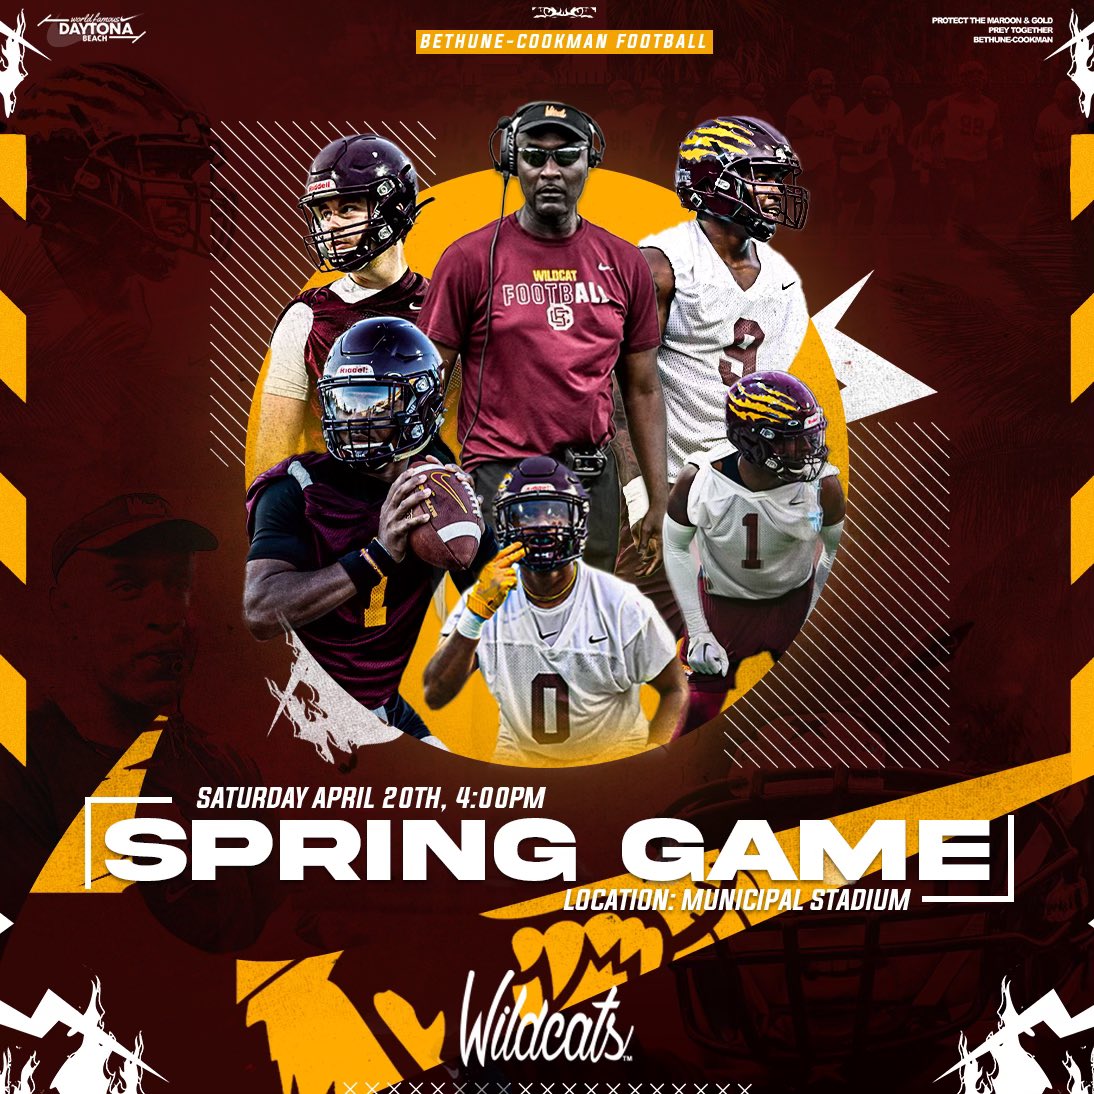 Come see what we are building in Daytona Beach! April 20th, save the date. #PreyTogether #HailWildcats #RiseToGreatness